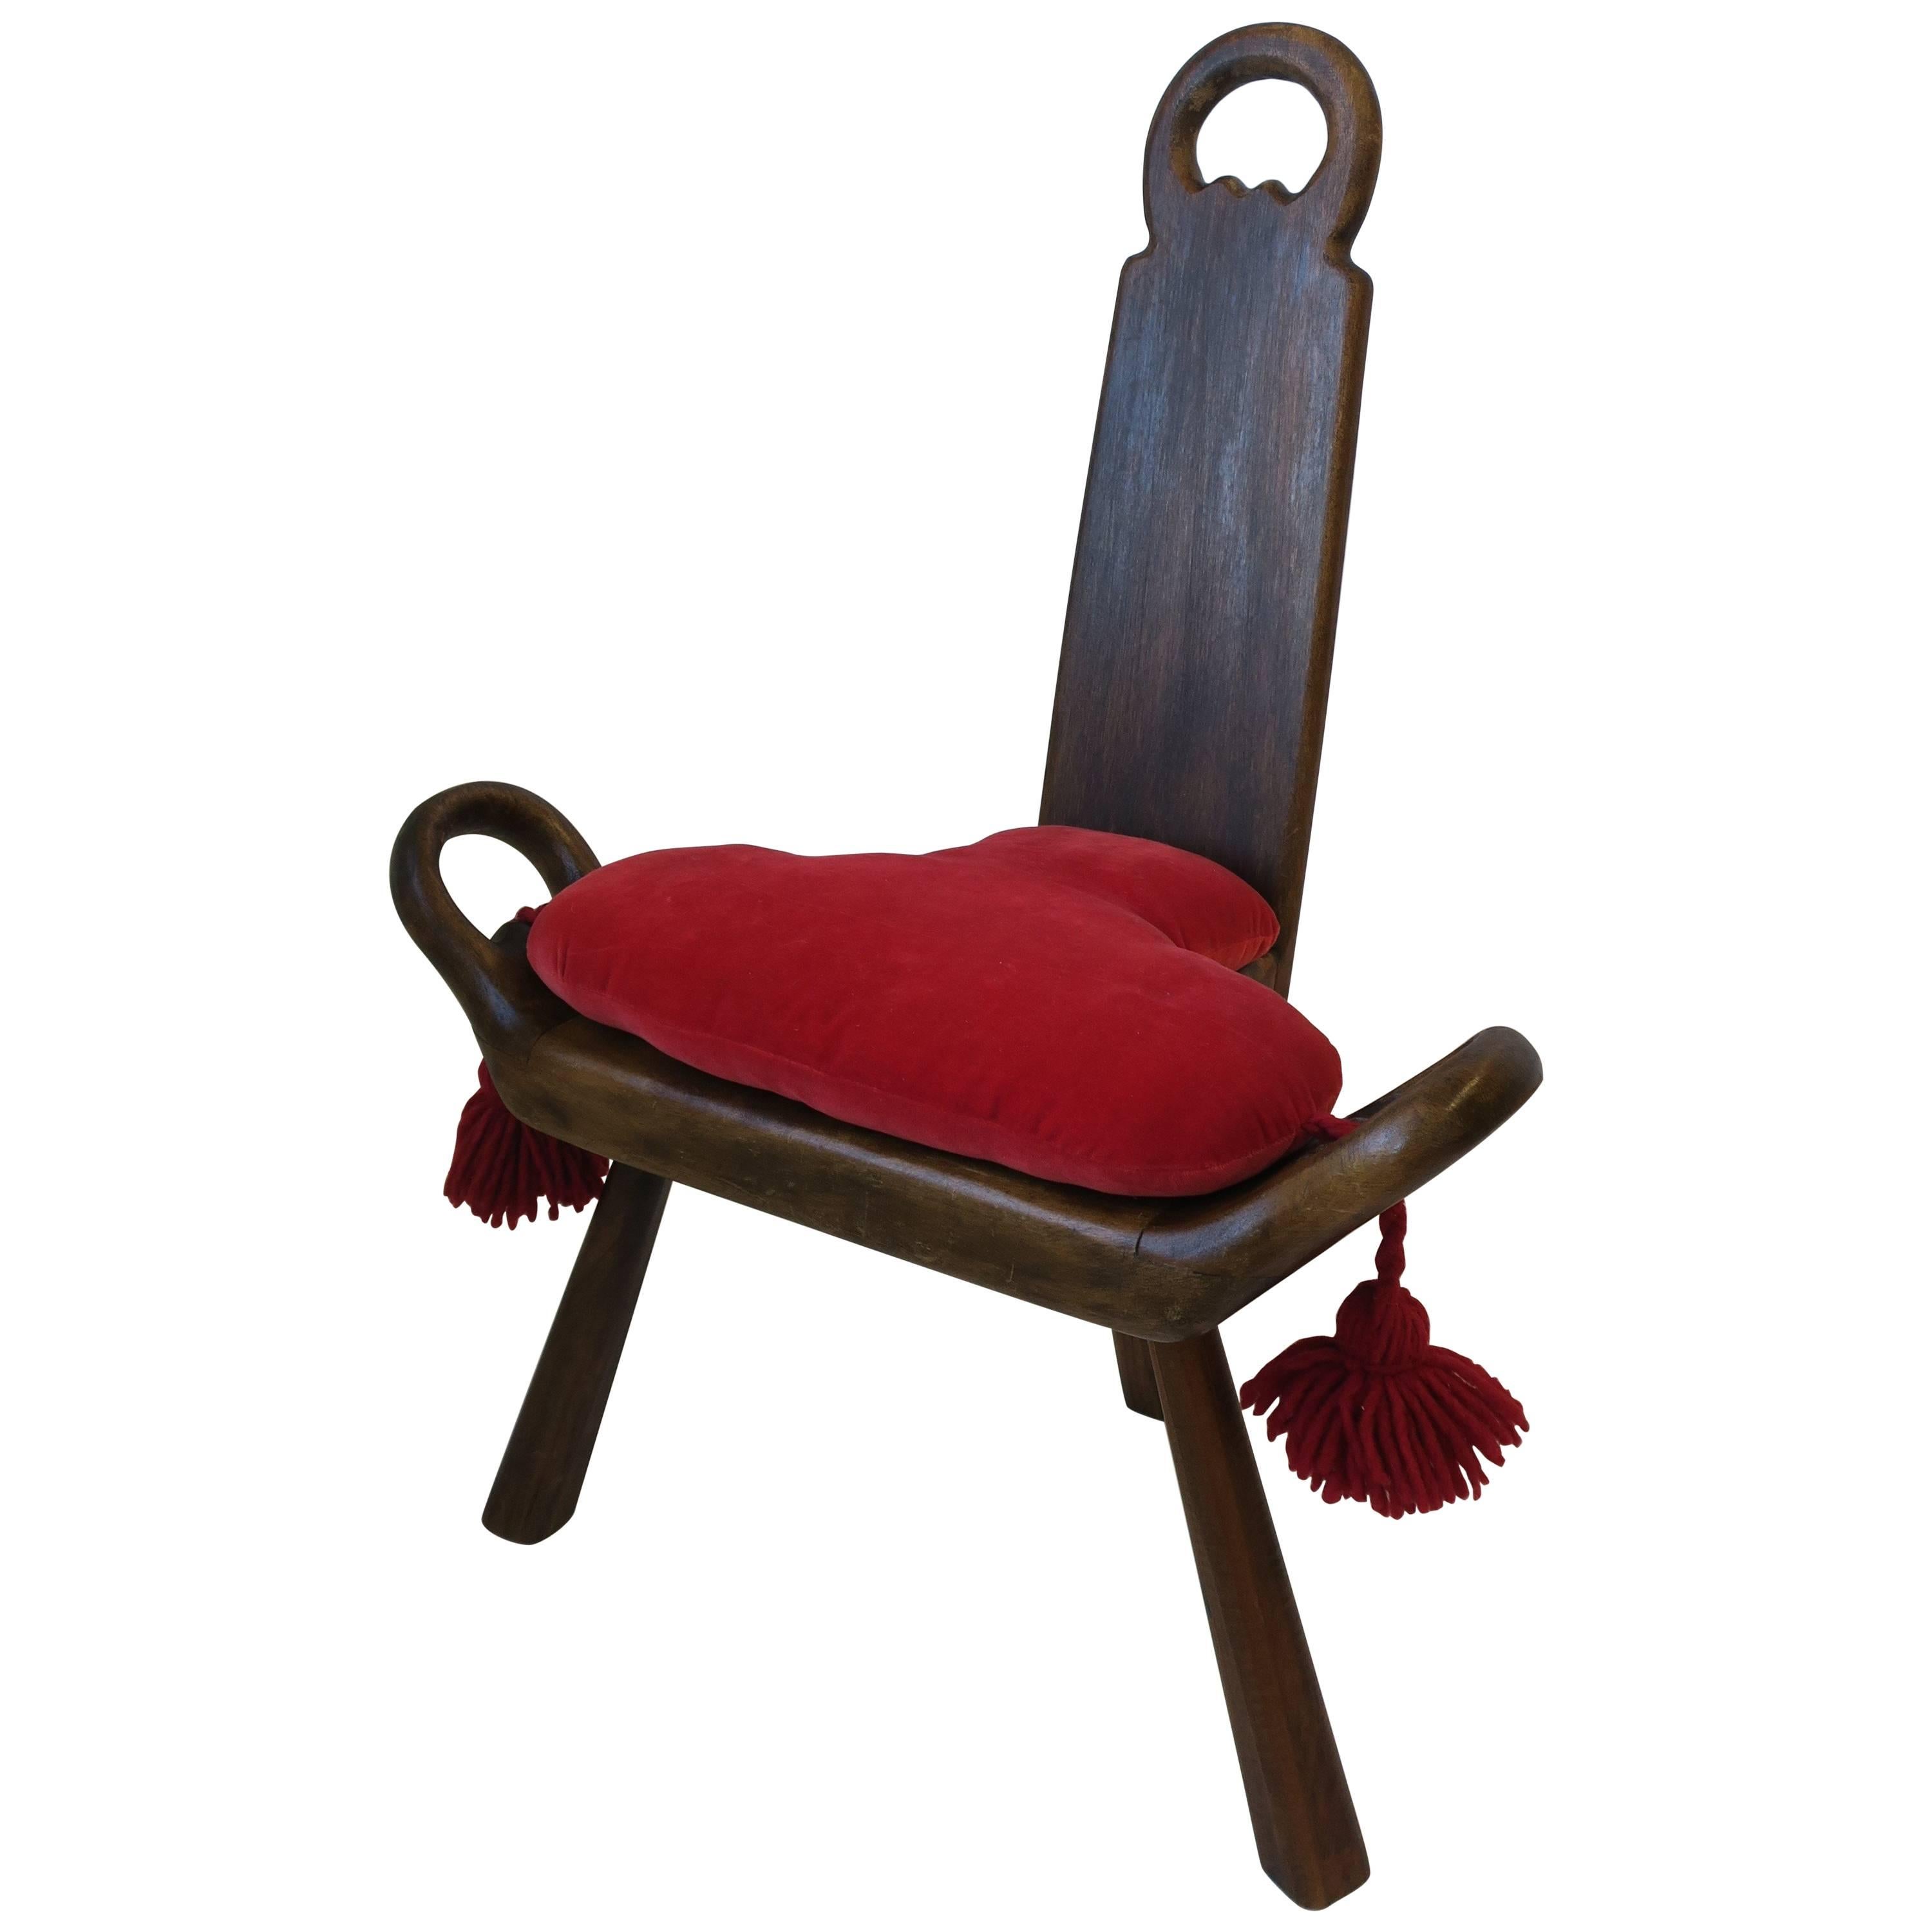 Italian Sgabello Side Chair or Stool with Red Velvet Seat Cushion